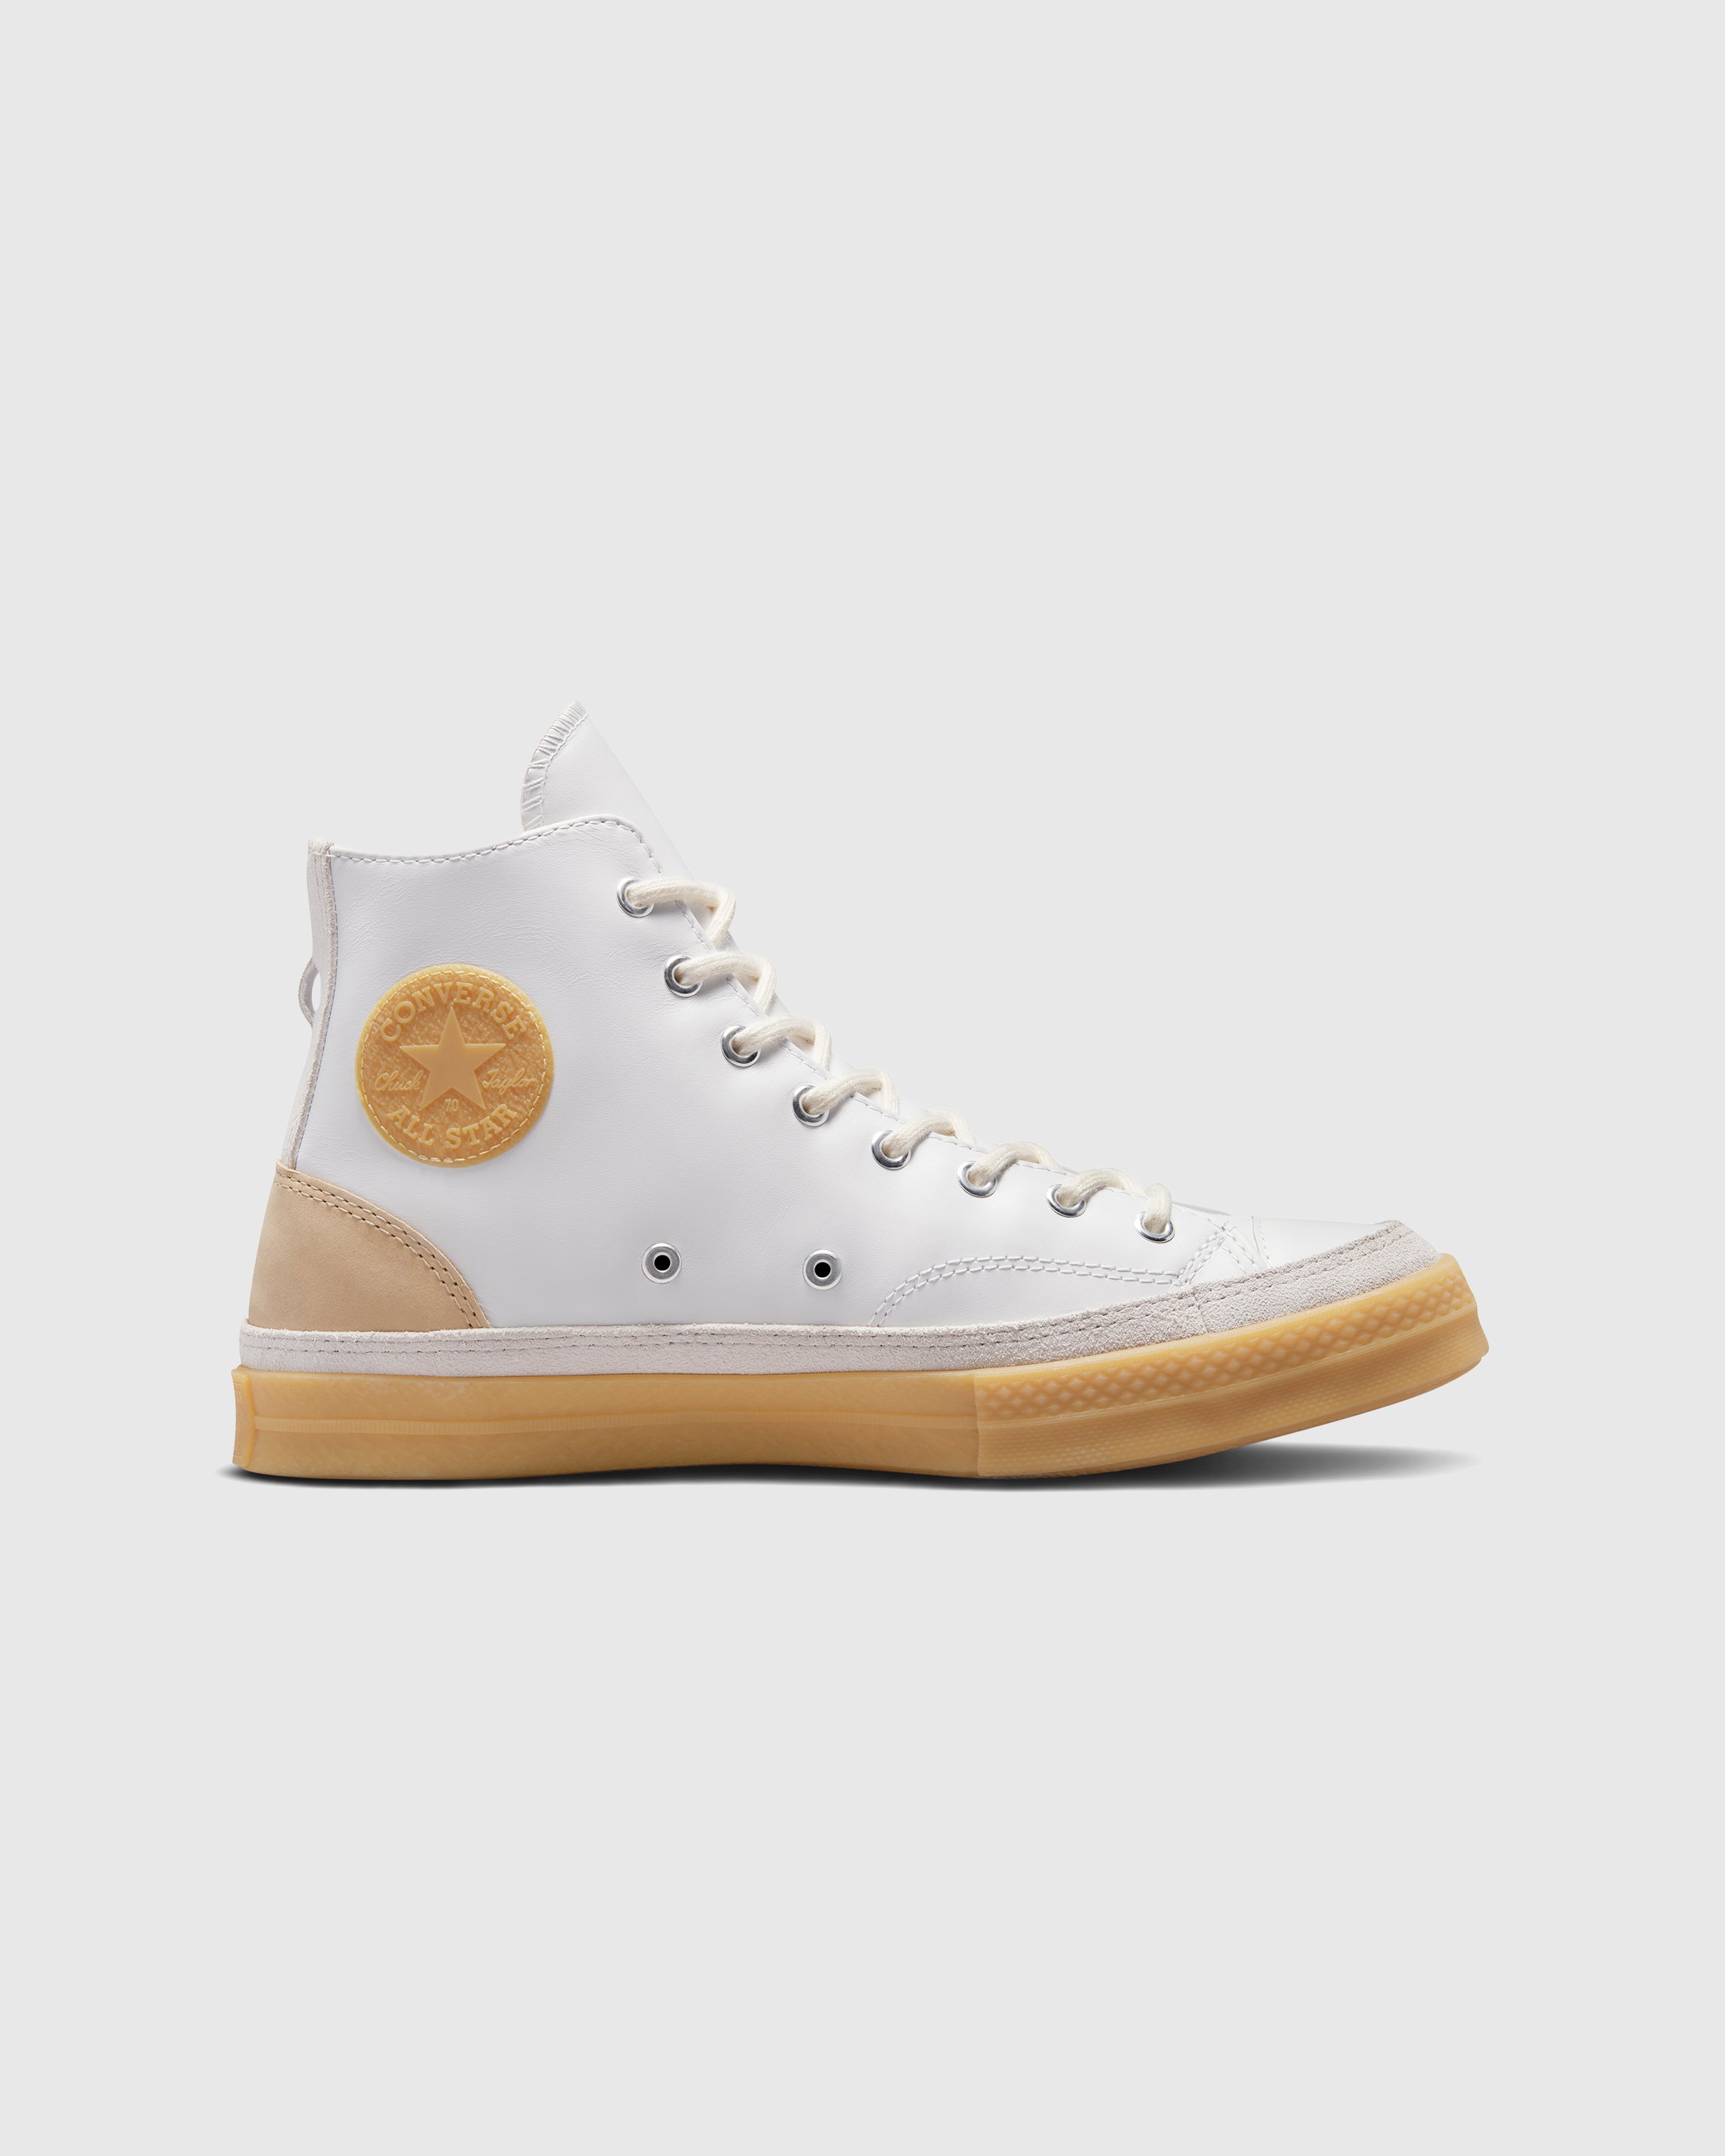 Converse - Chuck 70 Hi South of Houston White/Sunlight/Pale Putty - Footwear - White - Image 1